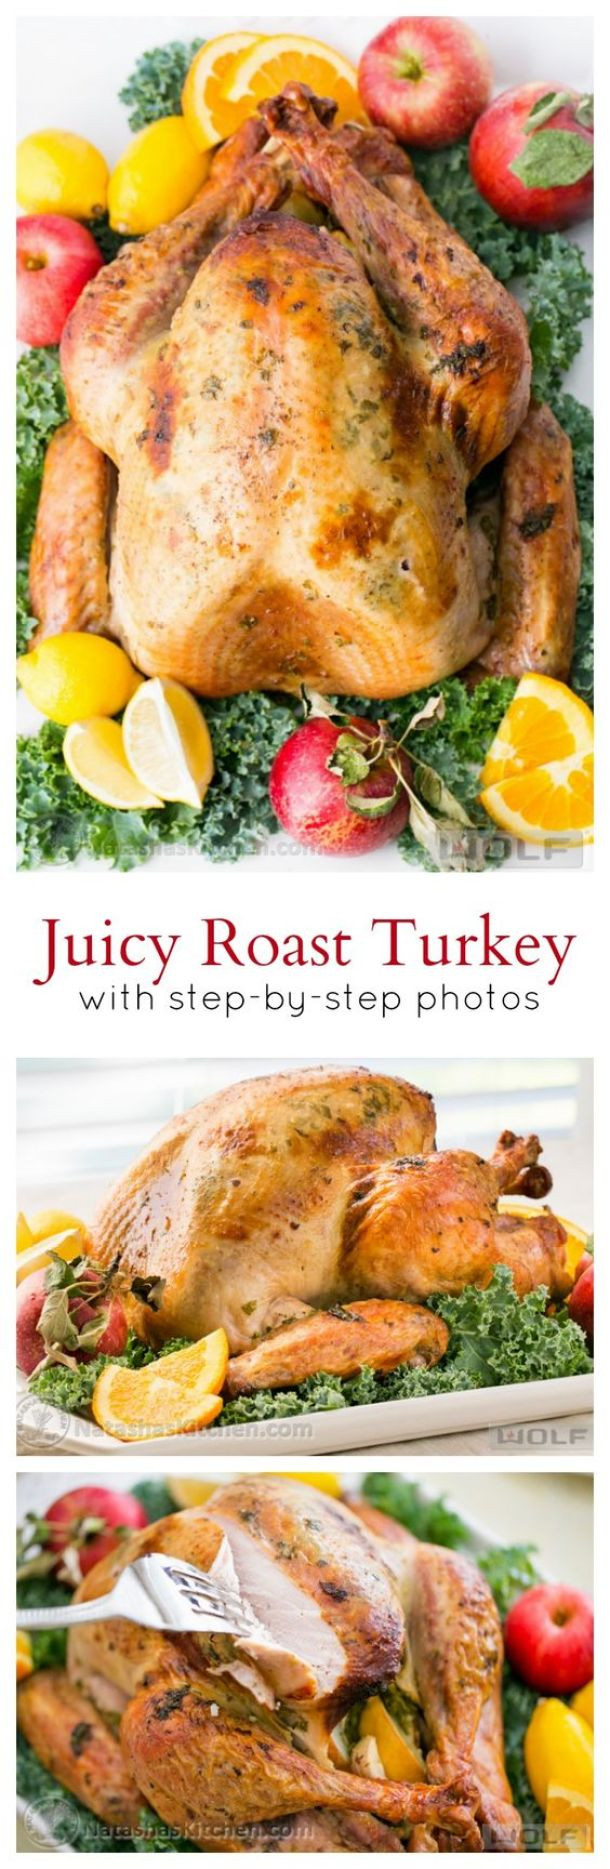 The Kitchen Thanksgiving Recipes
 The BEST Thanksgiving Dinner Holiday Favorite Menu Recipes